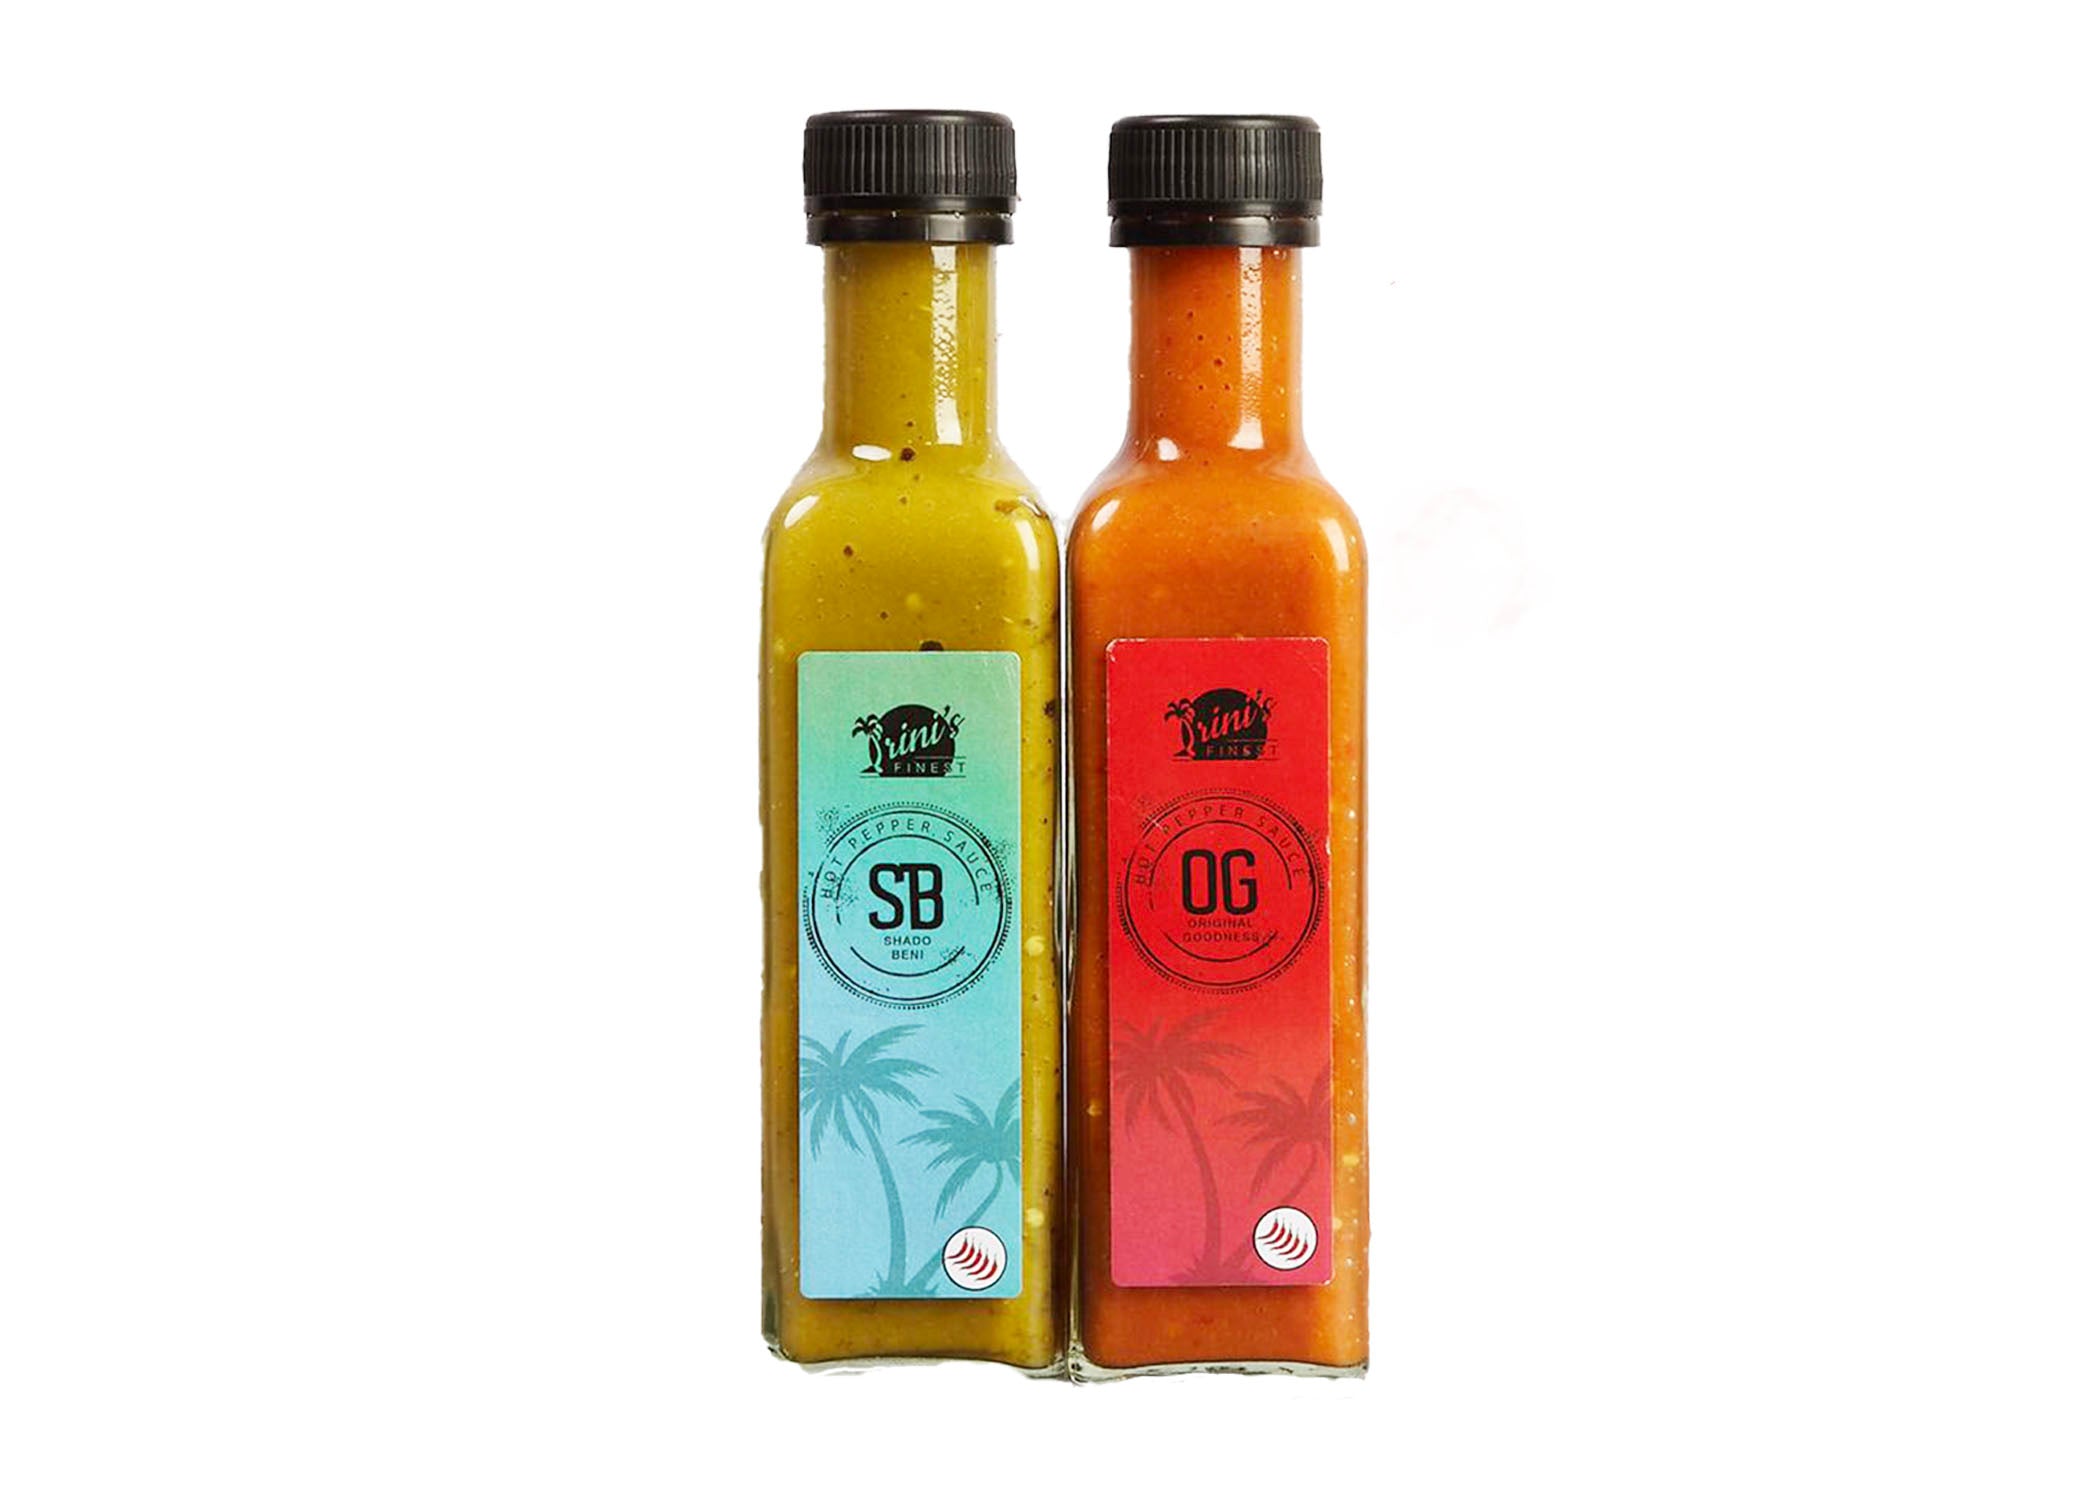 We’re delighted you’ve arrived at the home of perfect pepper sauces, inspired by Caribbean cuisine and made in Britain.